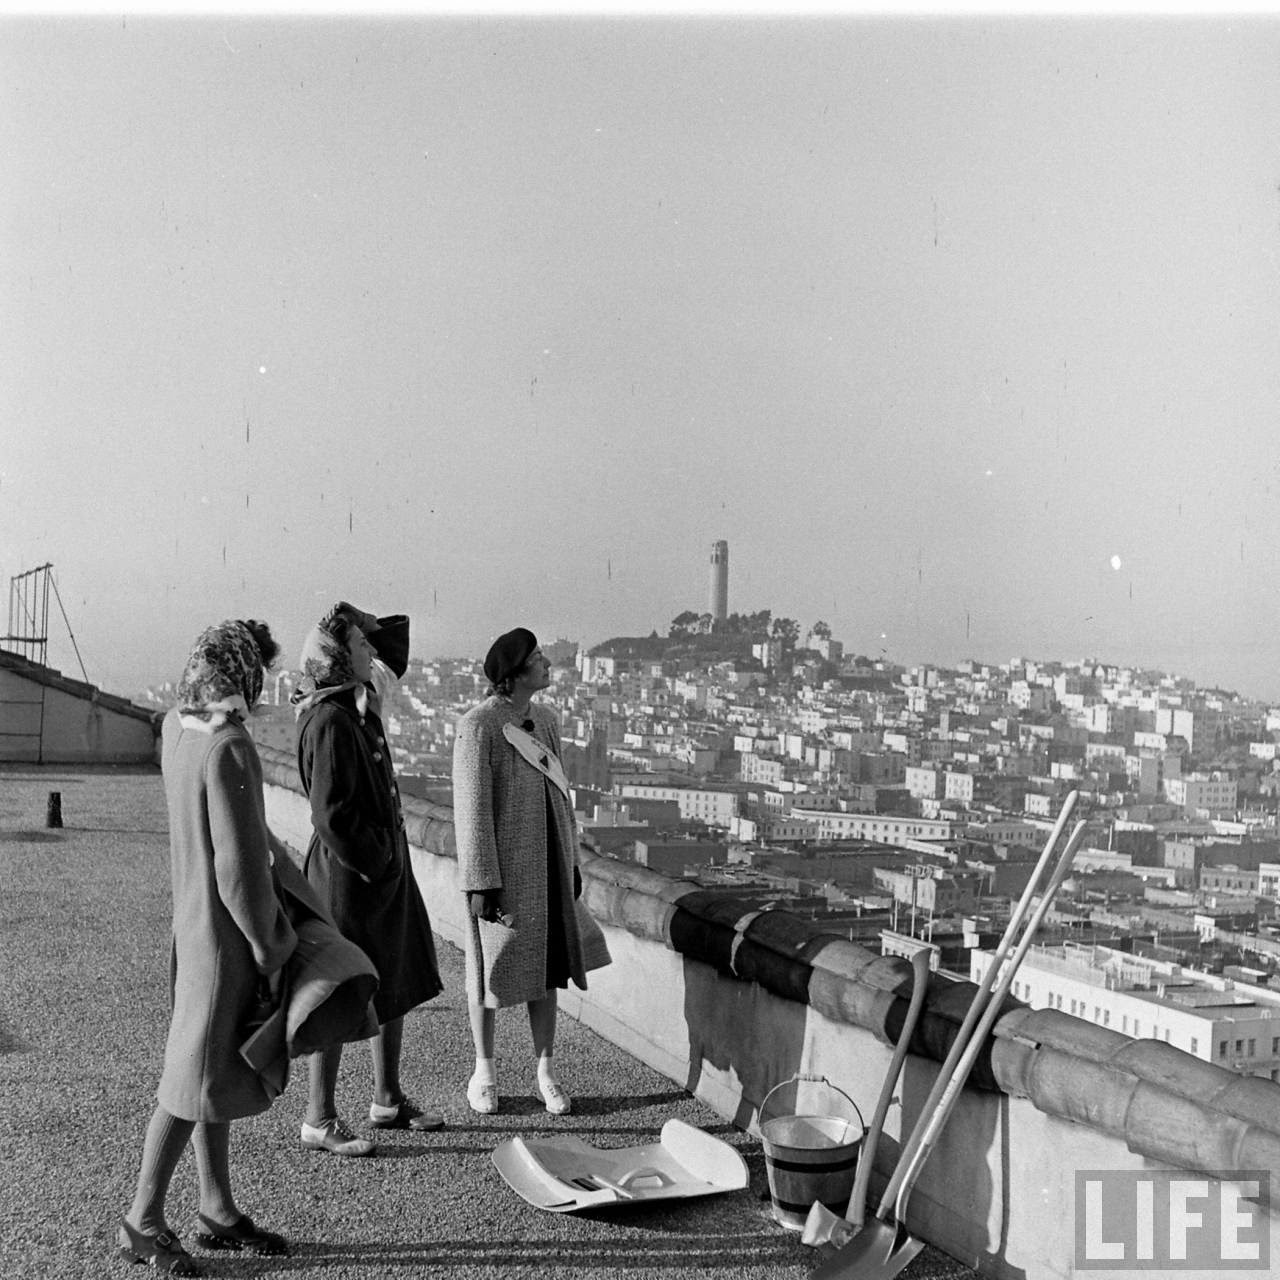 Interesting Black and White Photos Capture Daily Life in San Francisco, 1943 ~ vintage ...1280 x 1280